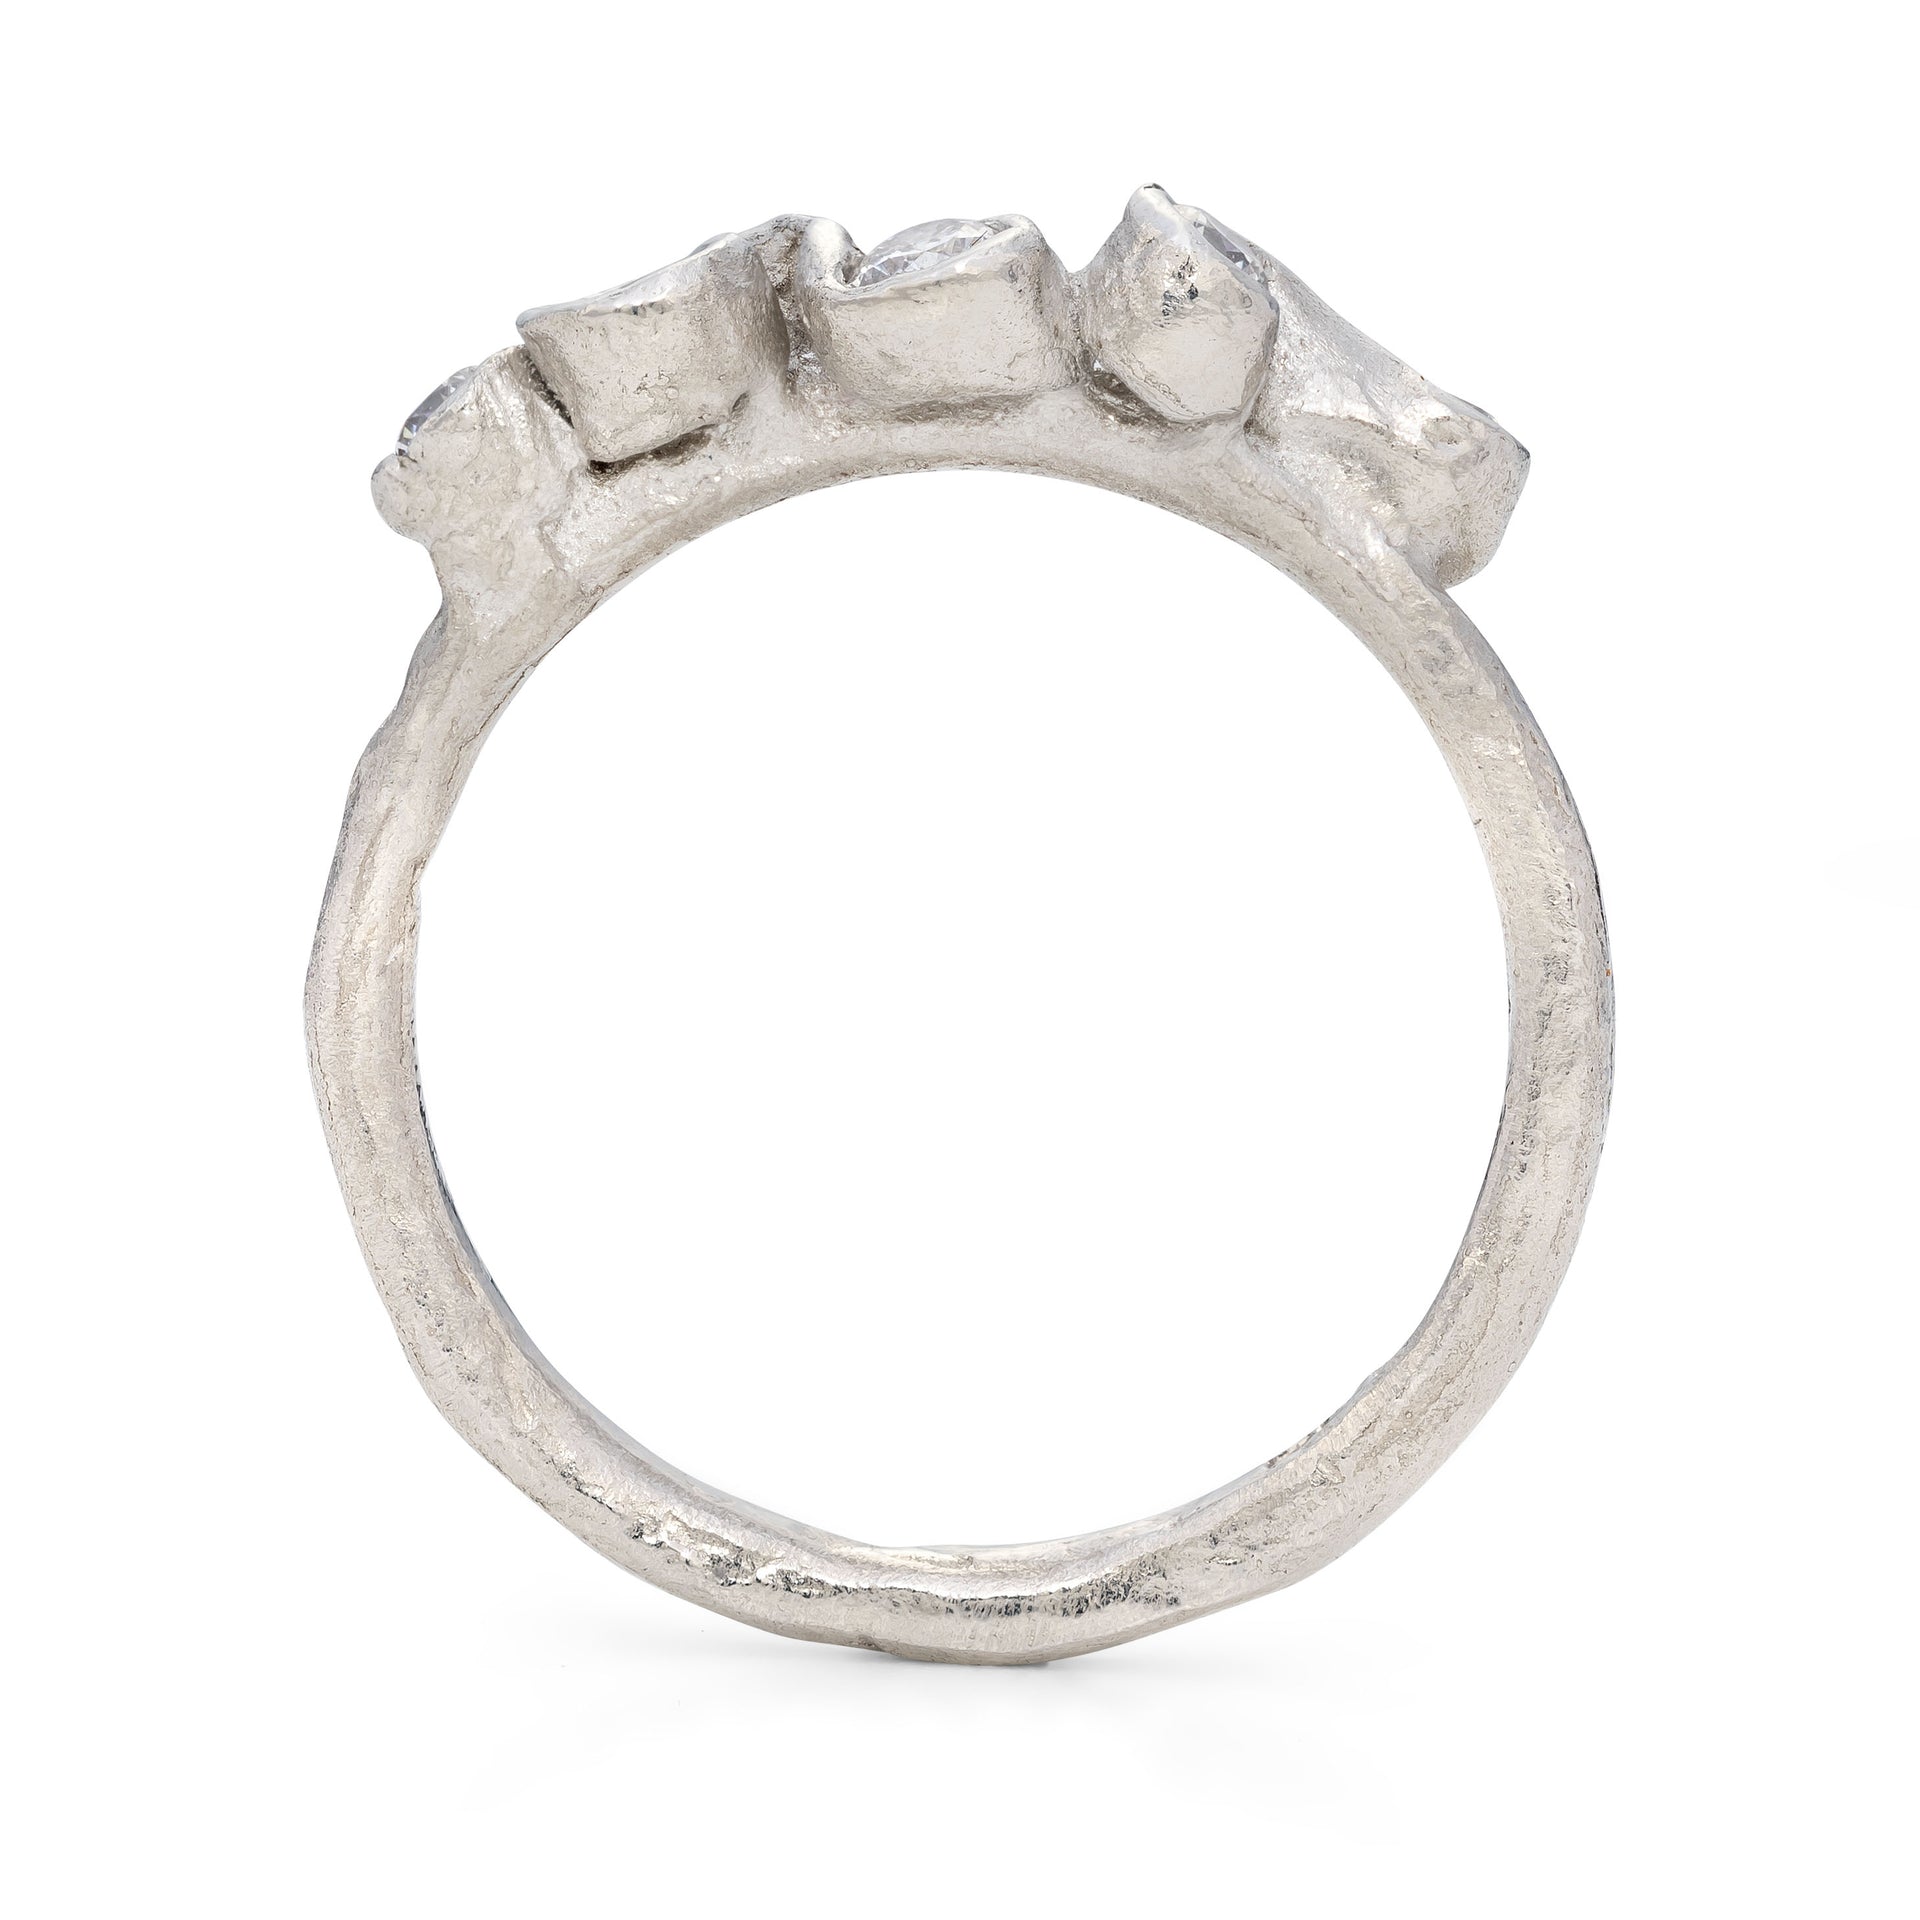 Upright, side view of platinum ring in organic design.